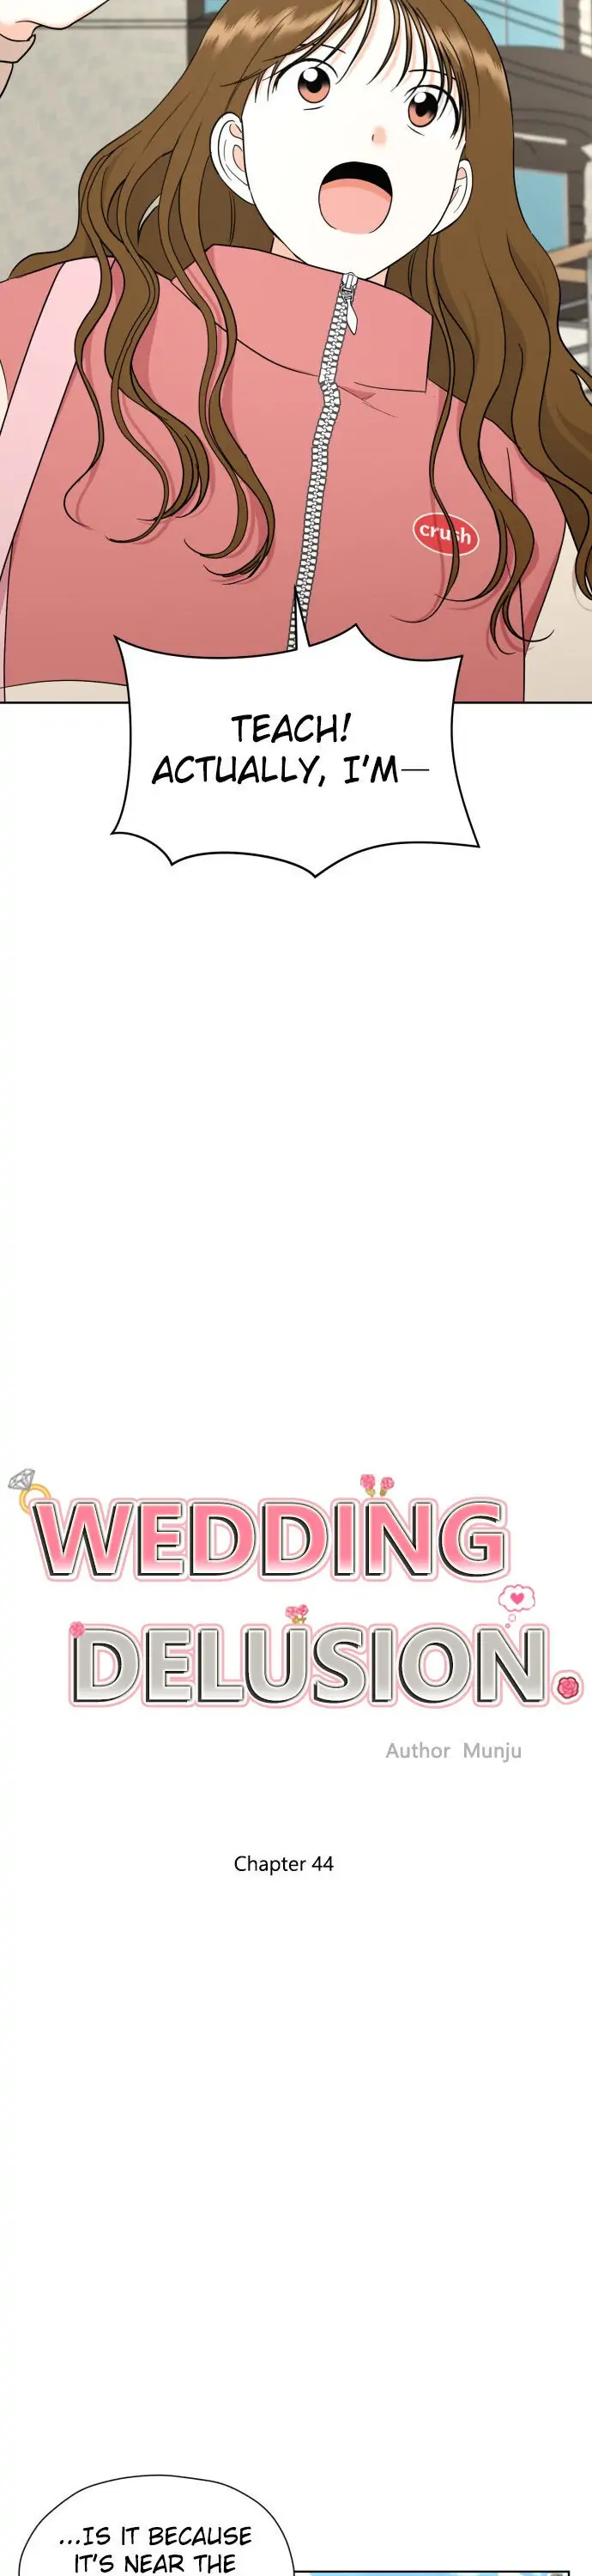 Wedding Delusion chapter 44